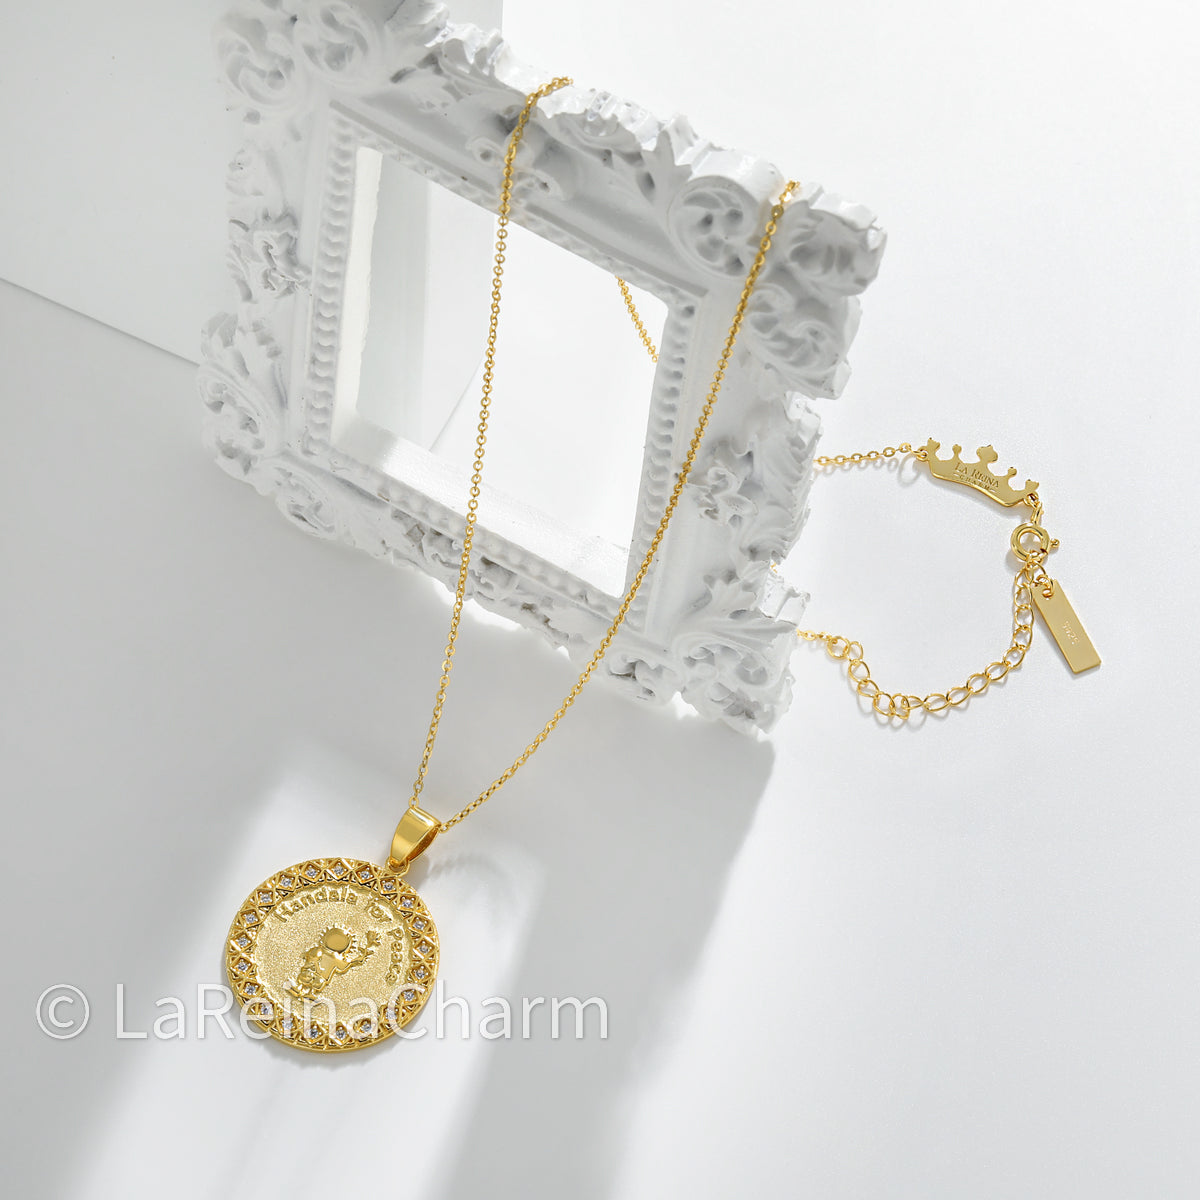 Limited Edition Handala for Peace - Palestine Necklace | 18K Gold-Plated